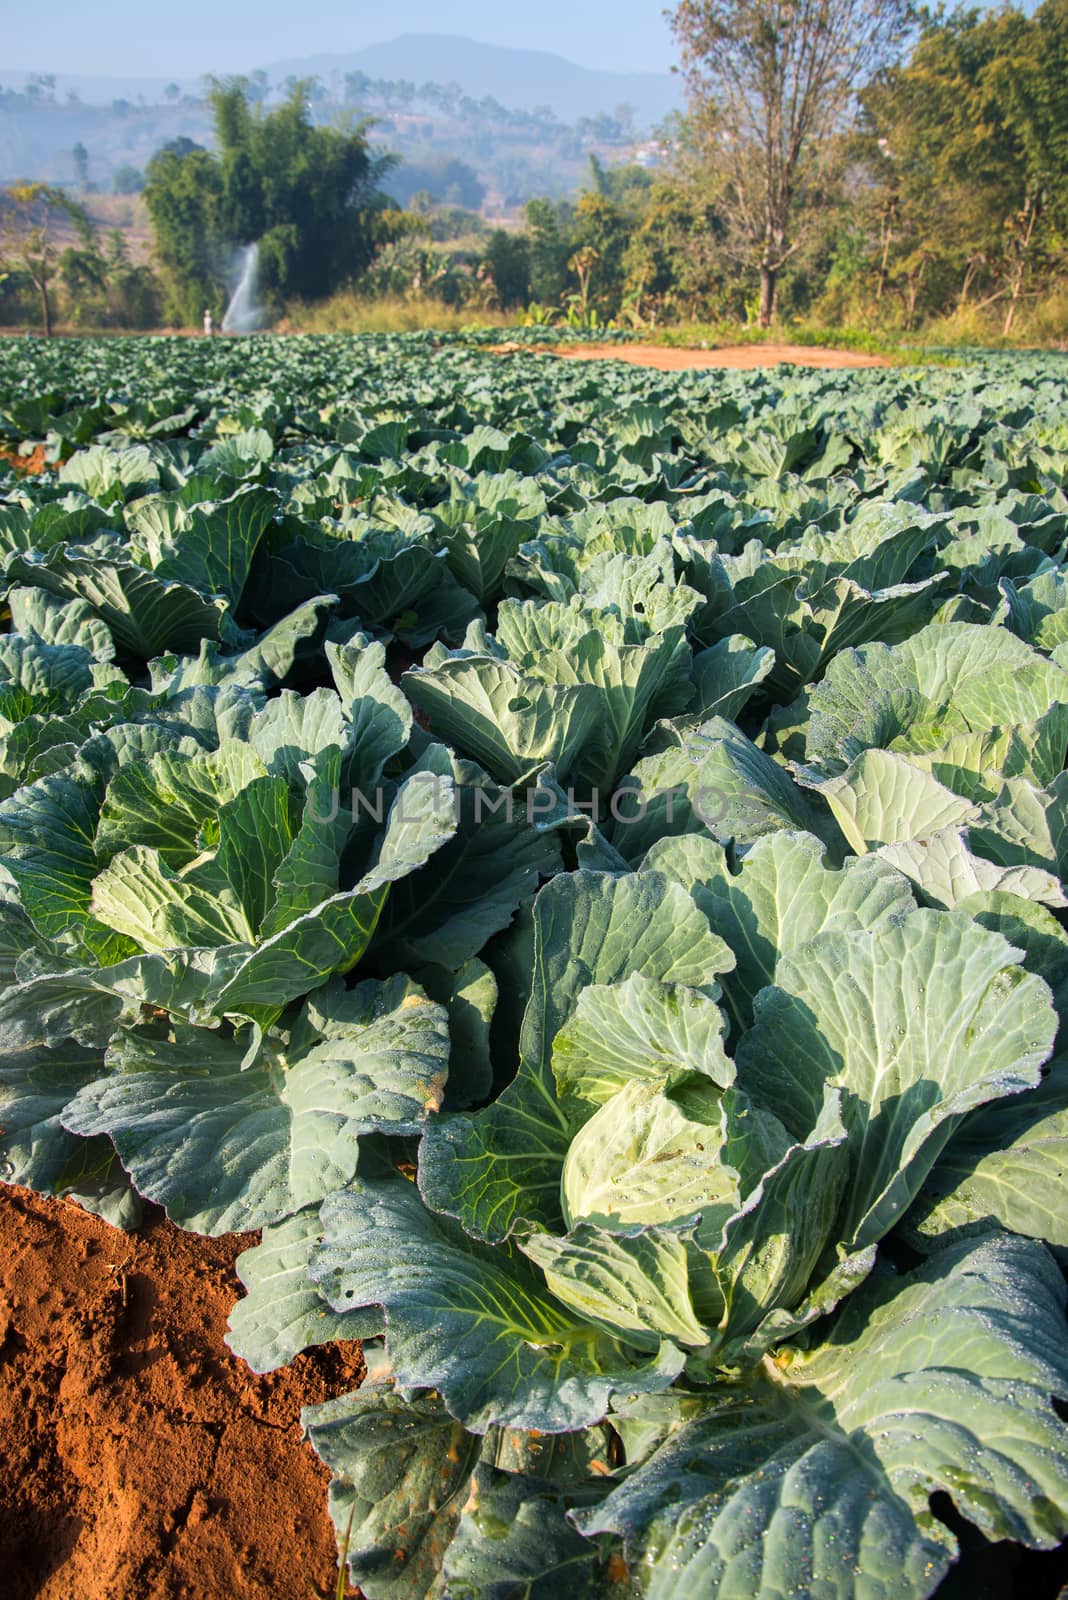 Many green cabbages in the agriculture fields by jakgree